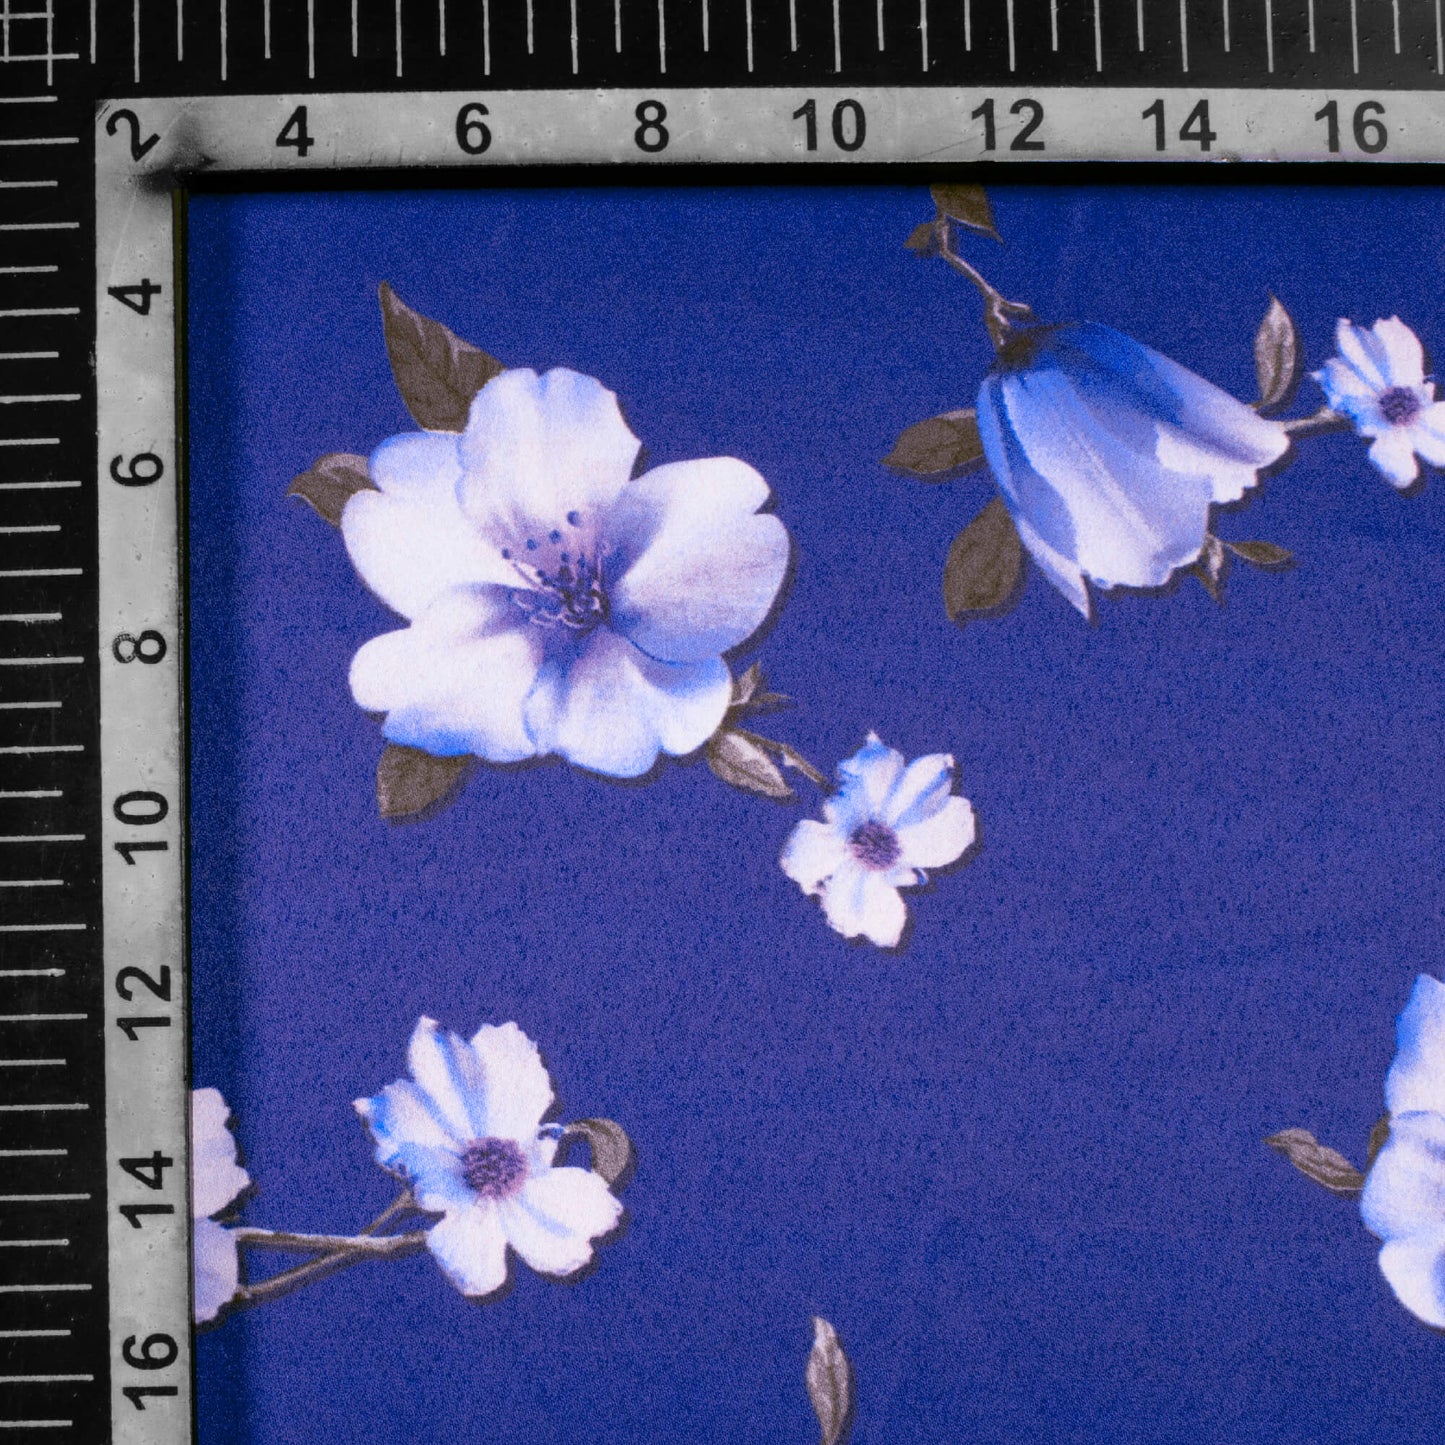 Royal Blue Floral Pattern Digital Print Charmeuse Satin Fabric (Width 58 Inches)